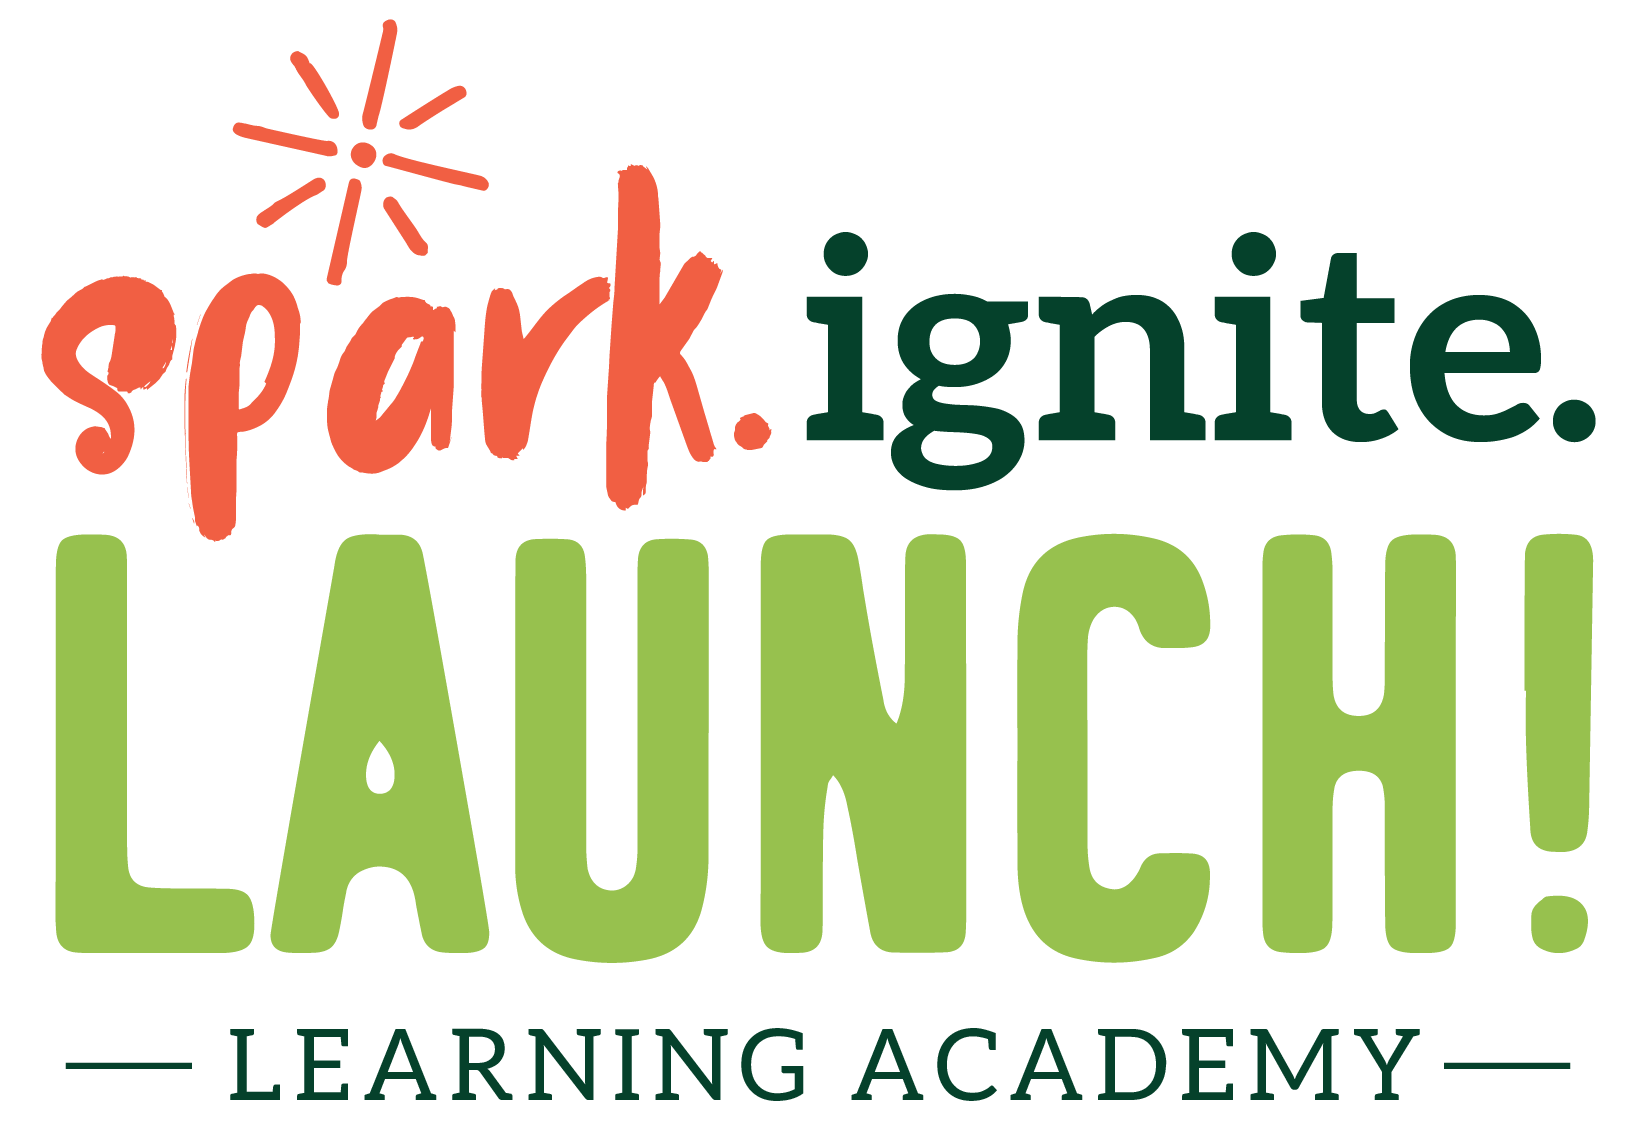 Spark. Ignite. Launch! Learning Academy